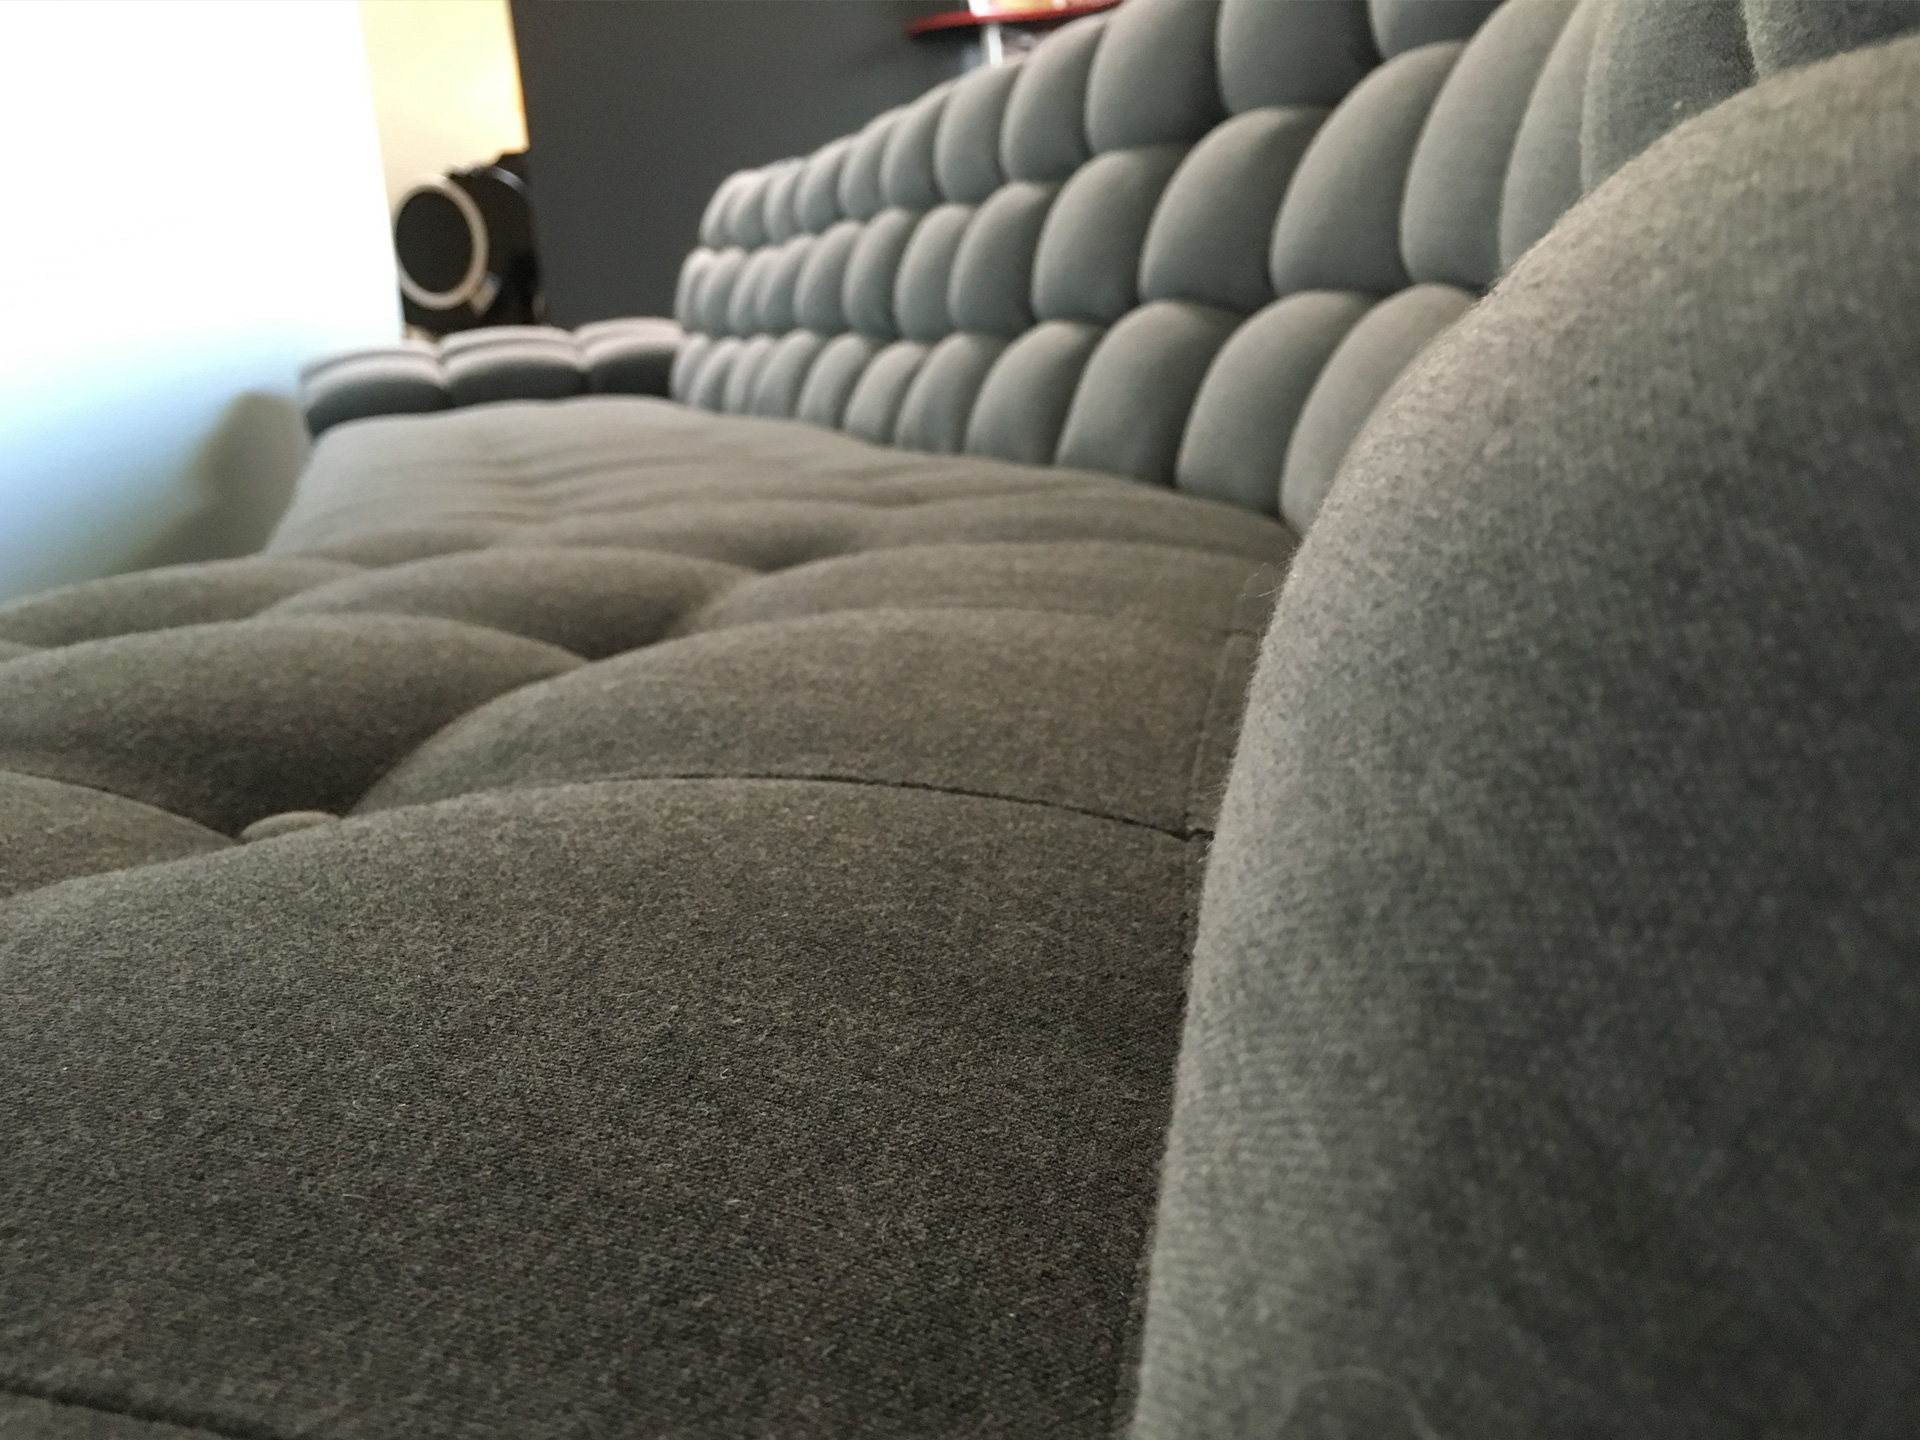 Close up detail of Couch Lounger cushion tuft